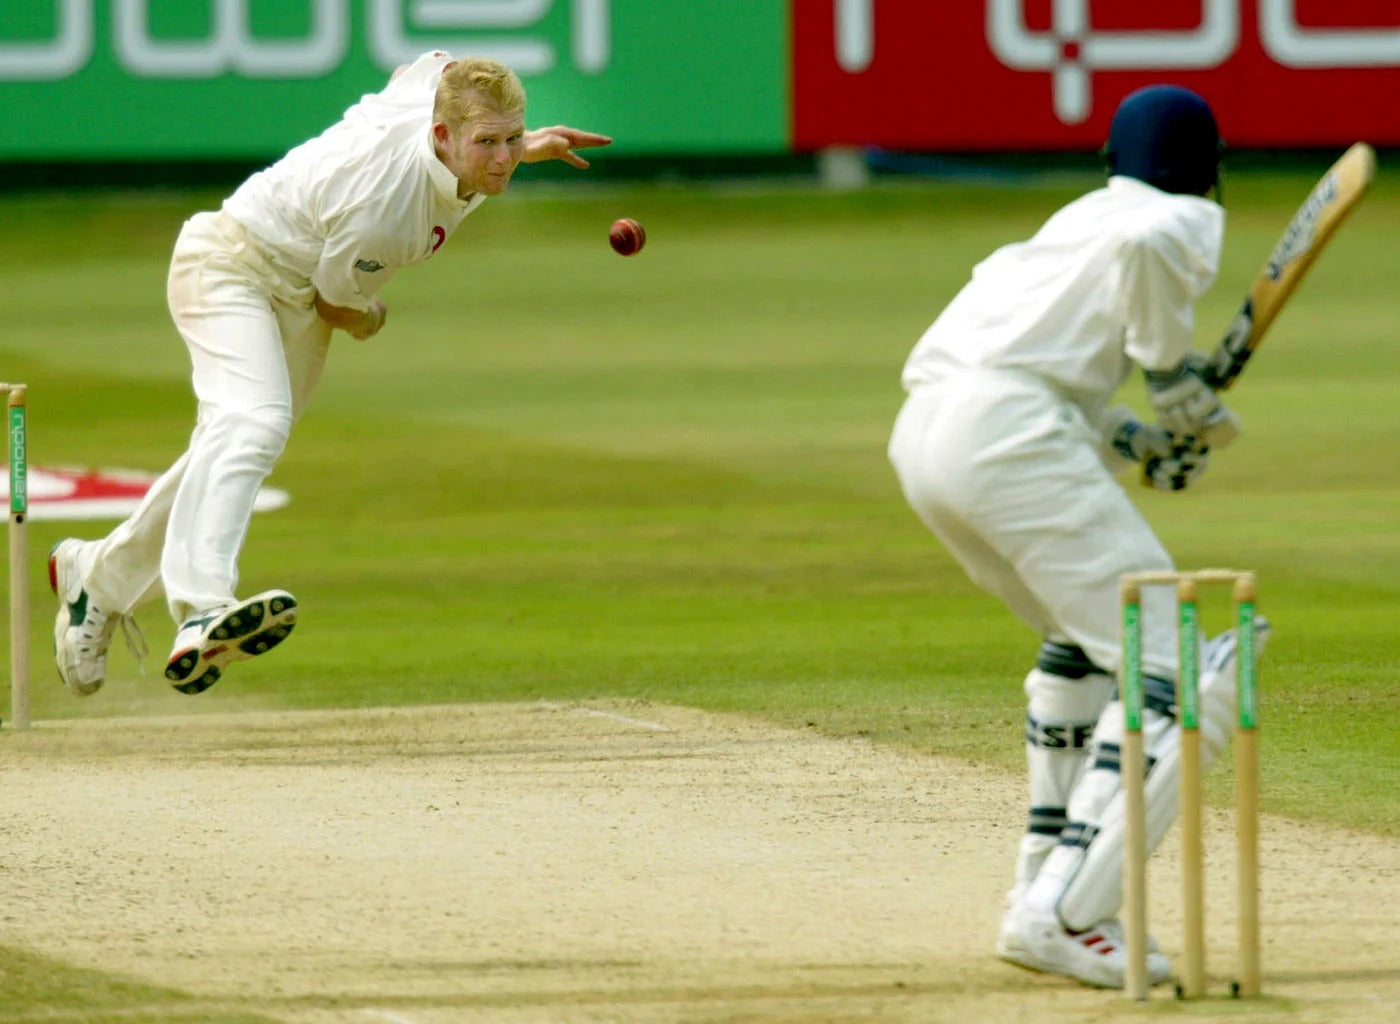 A bowler bowls a swinging delivery to the batsman